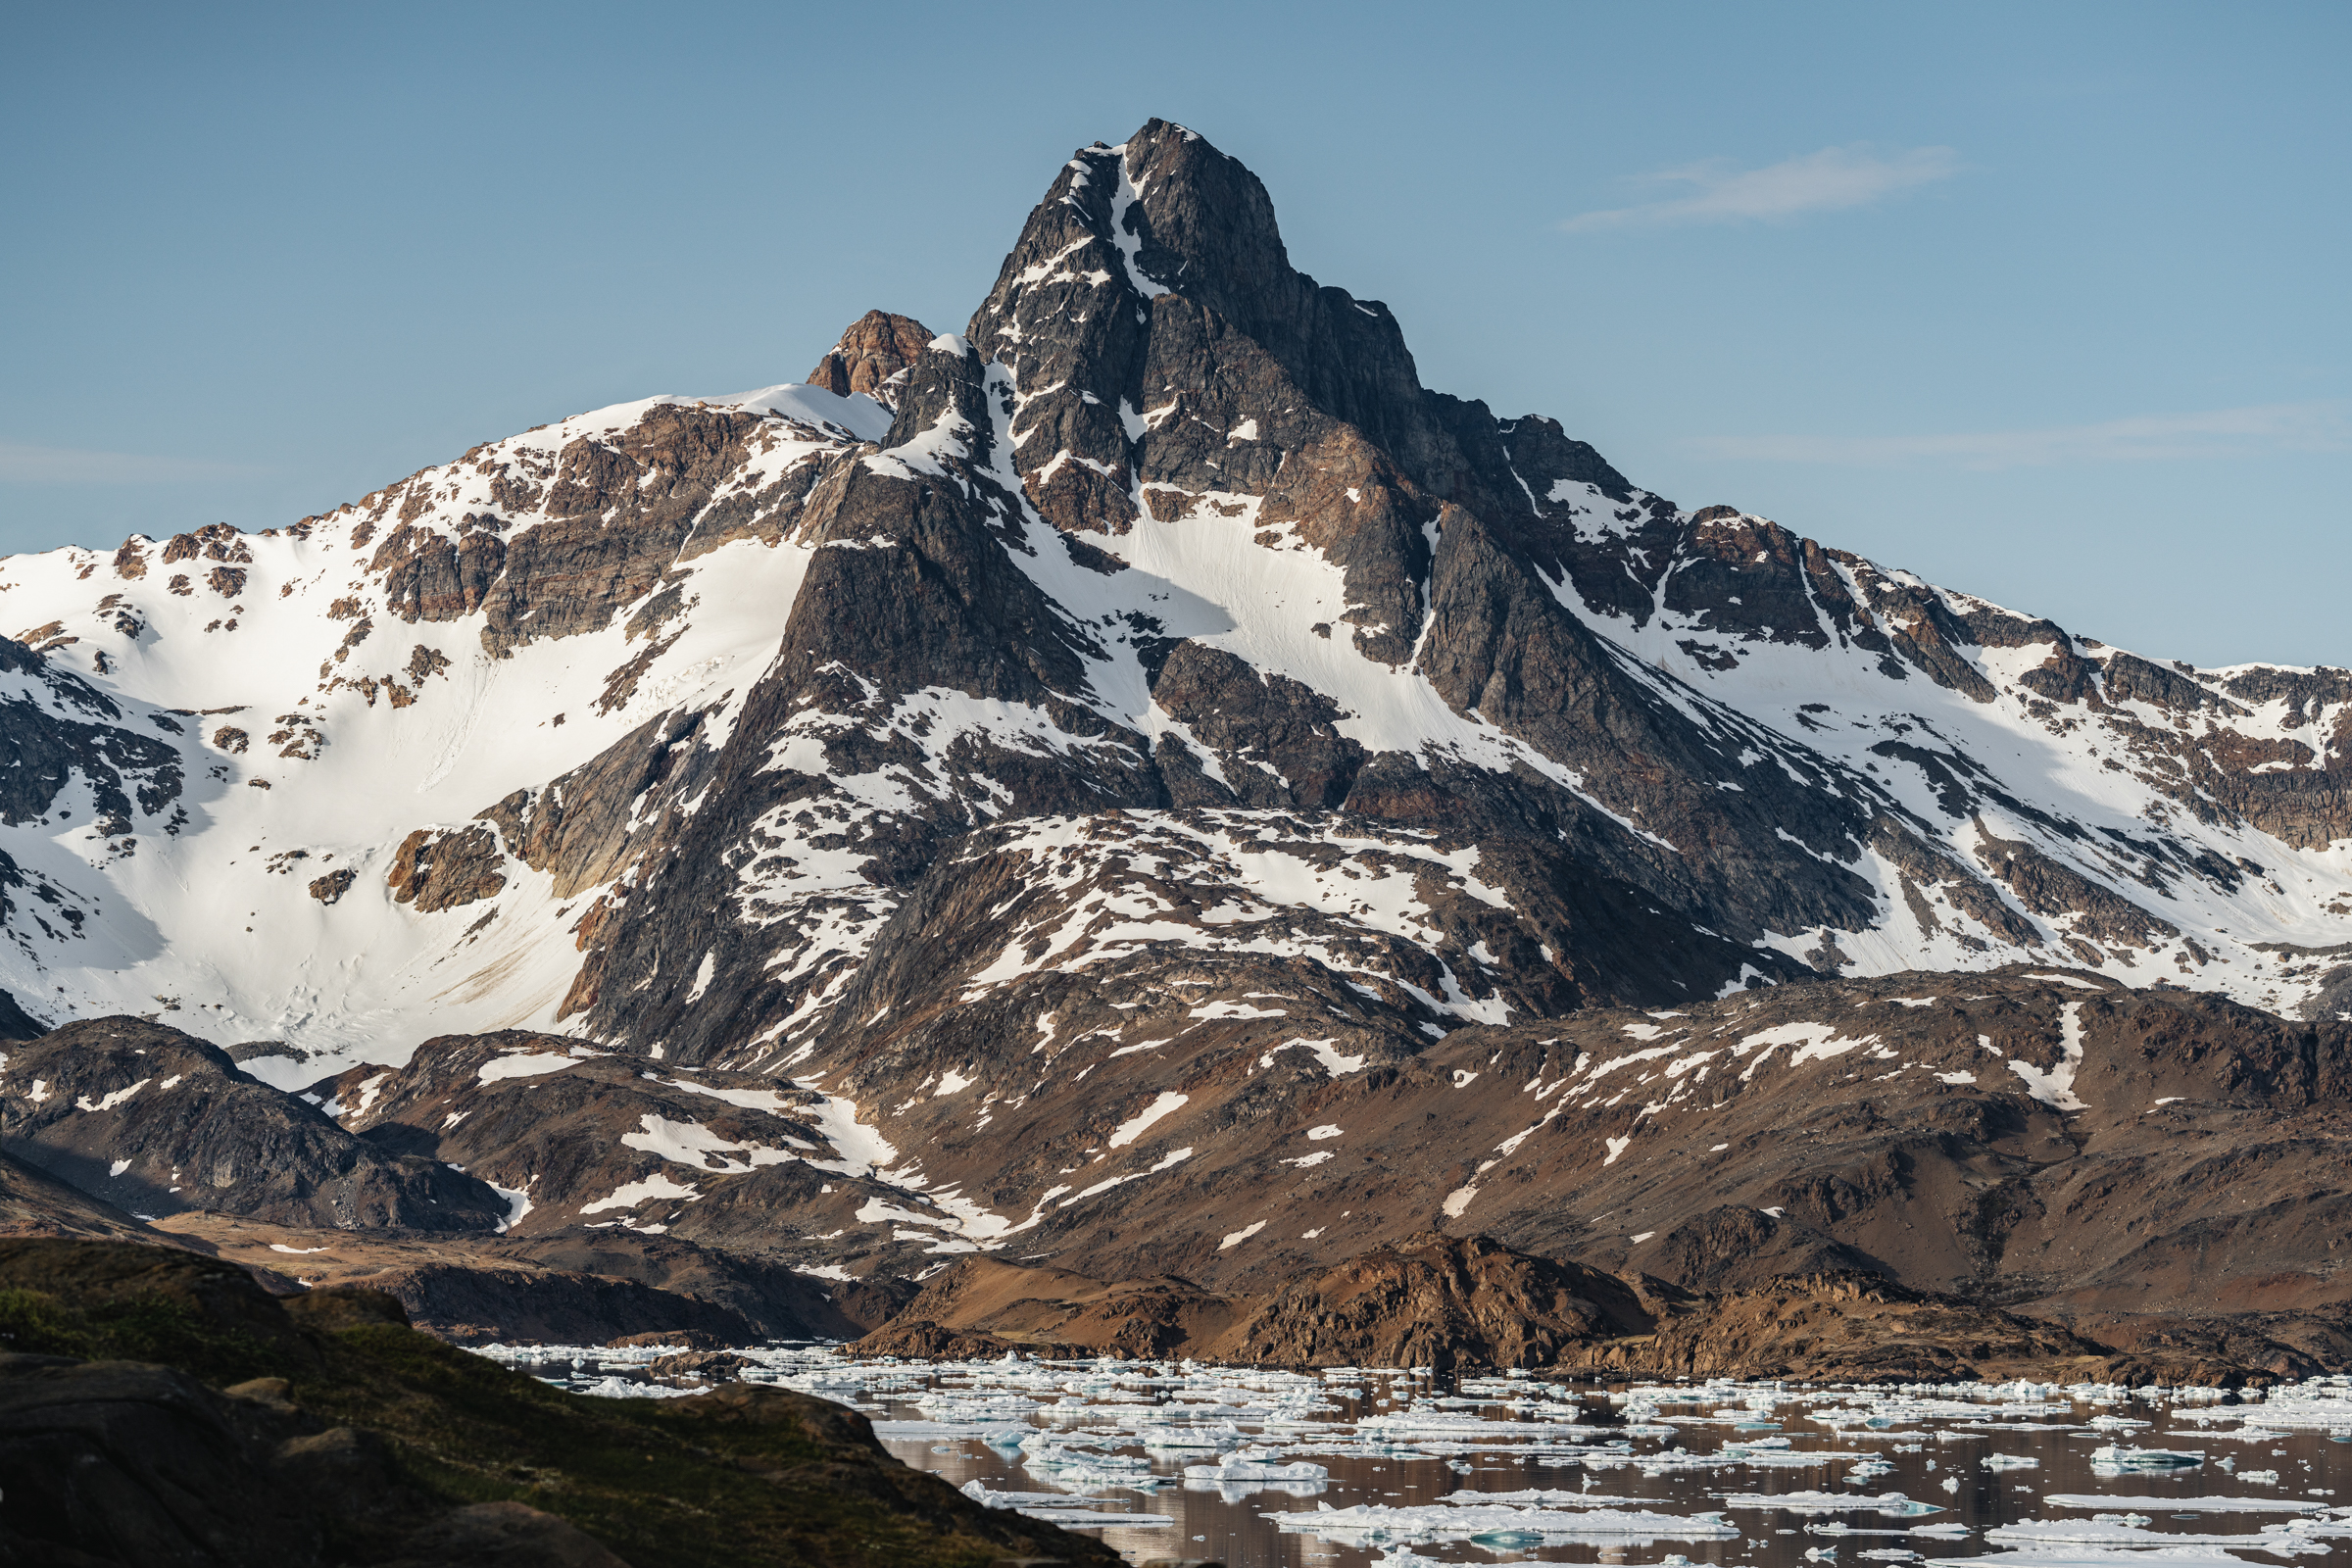 Icon Polhem mountain. Photo by Filip Gielda - Visit East Greenland